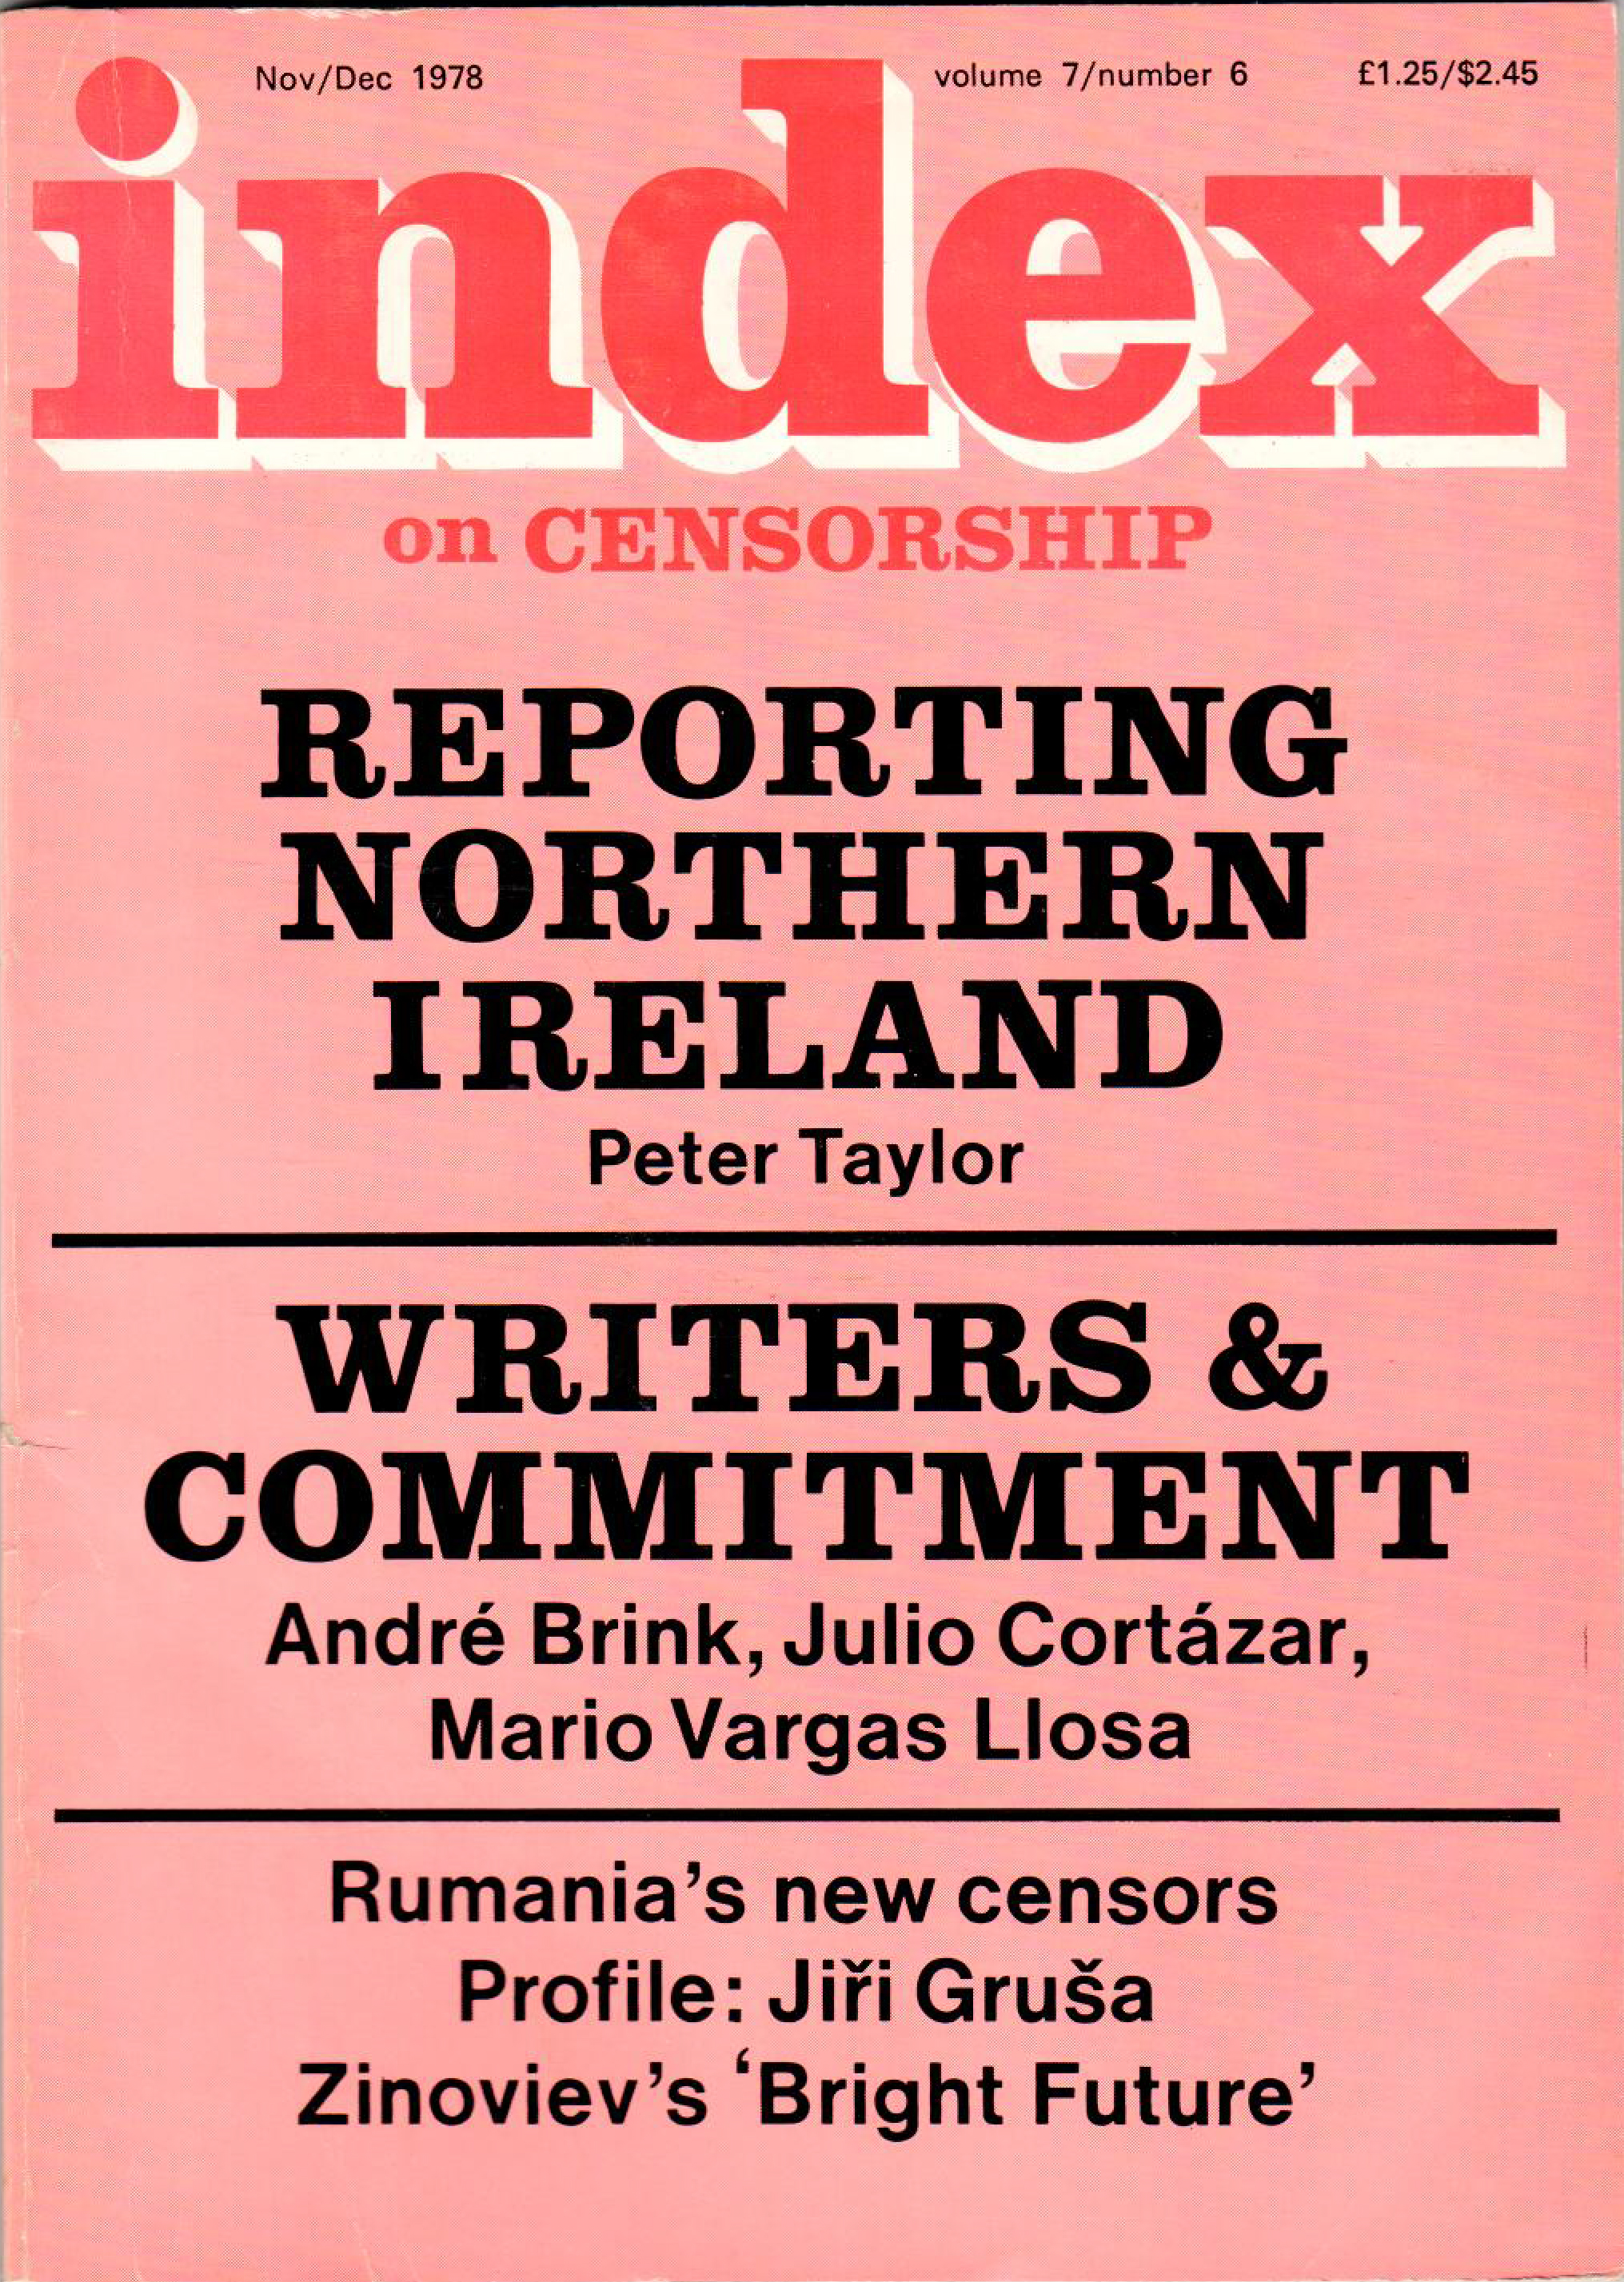 Reporting Northern Ireland, the November 1978 issue of Index on Censorship magazine